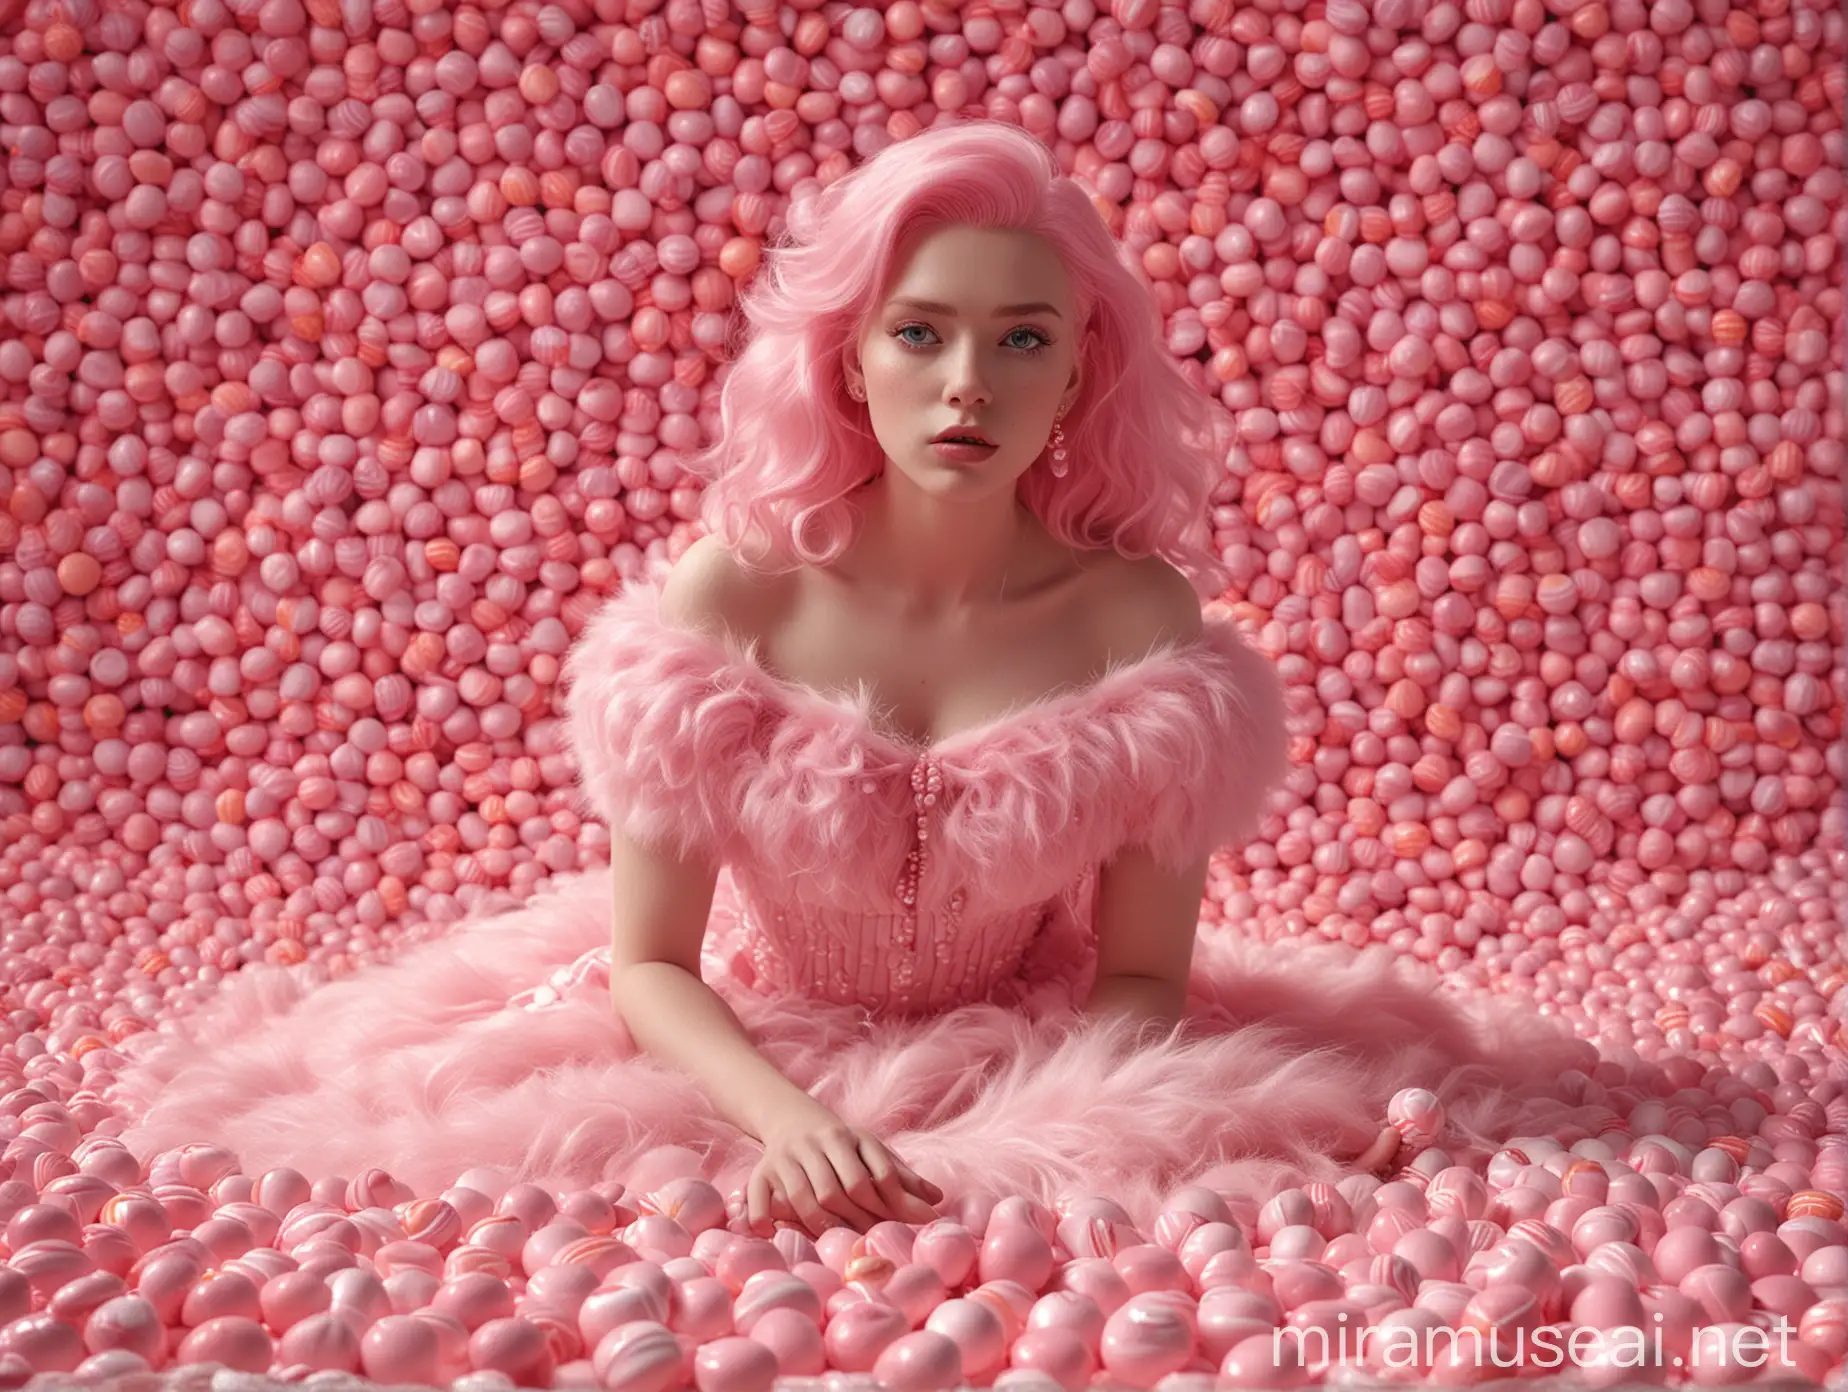 PinkHaired Woman Surrounded by Candy in Creamy Field Sculpture